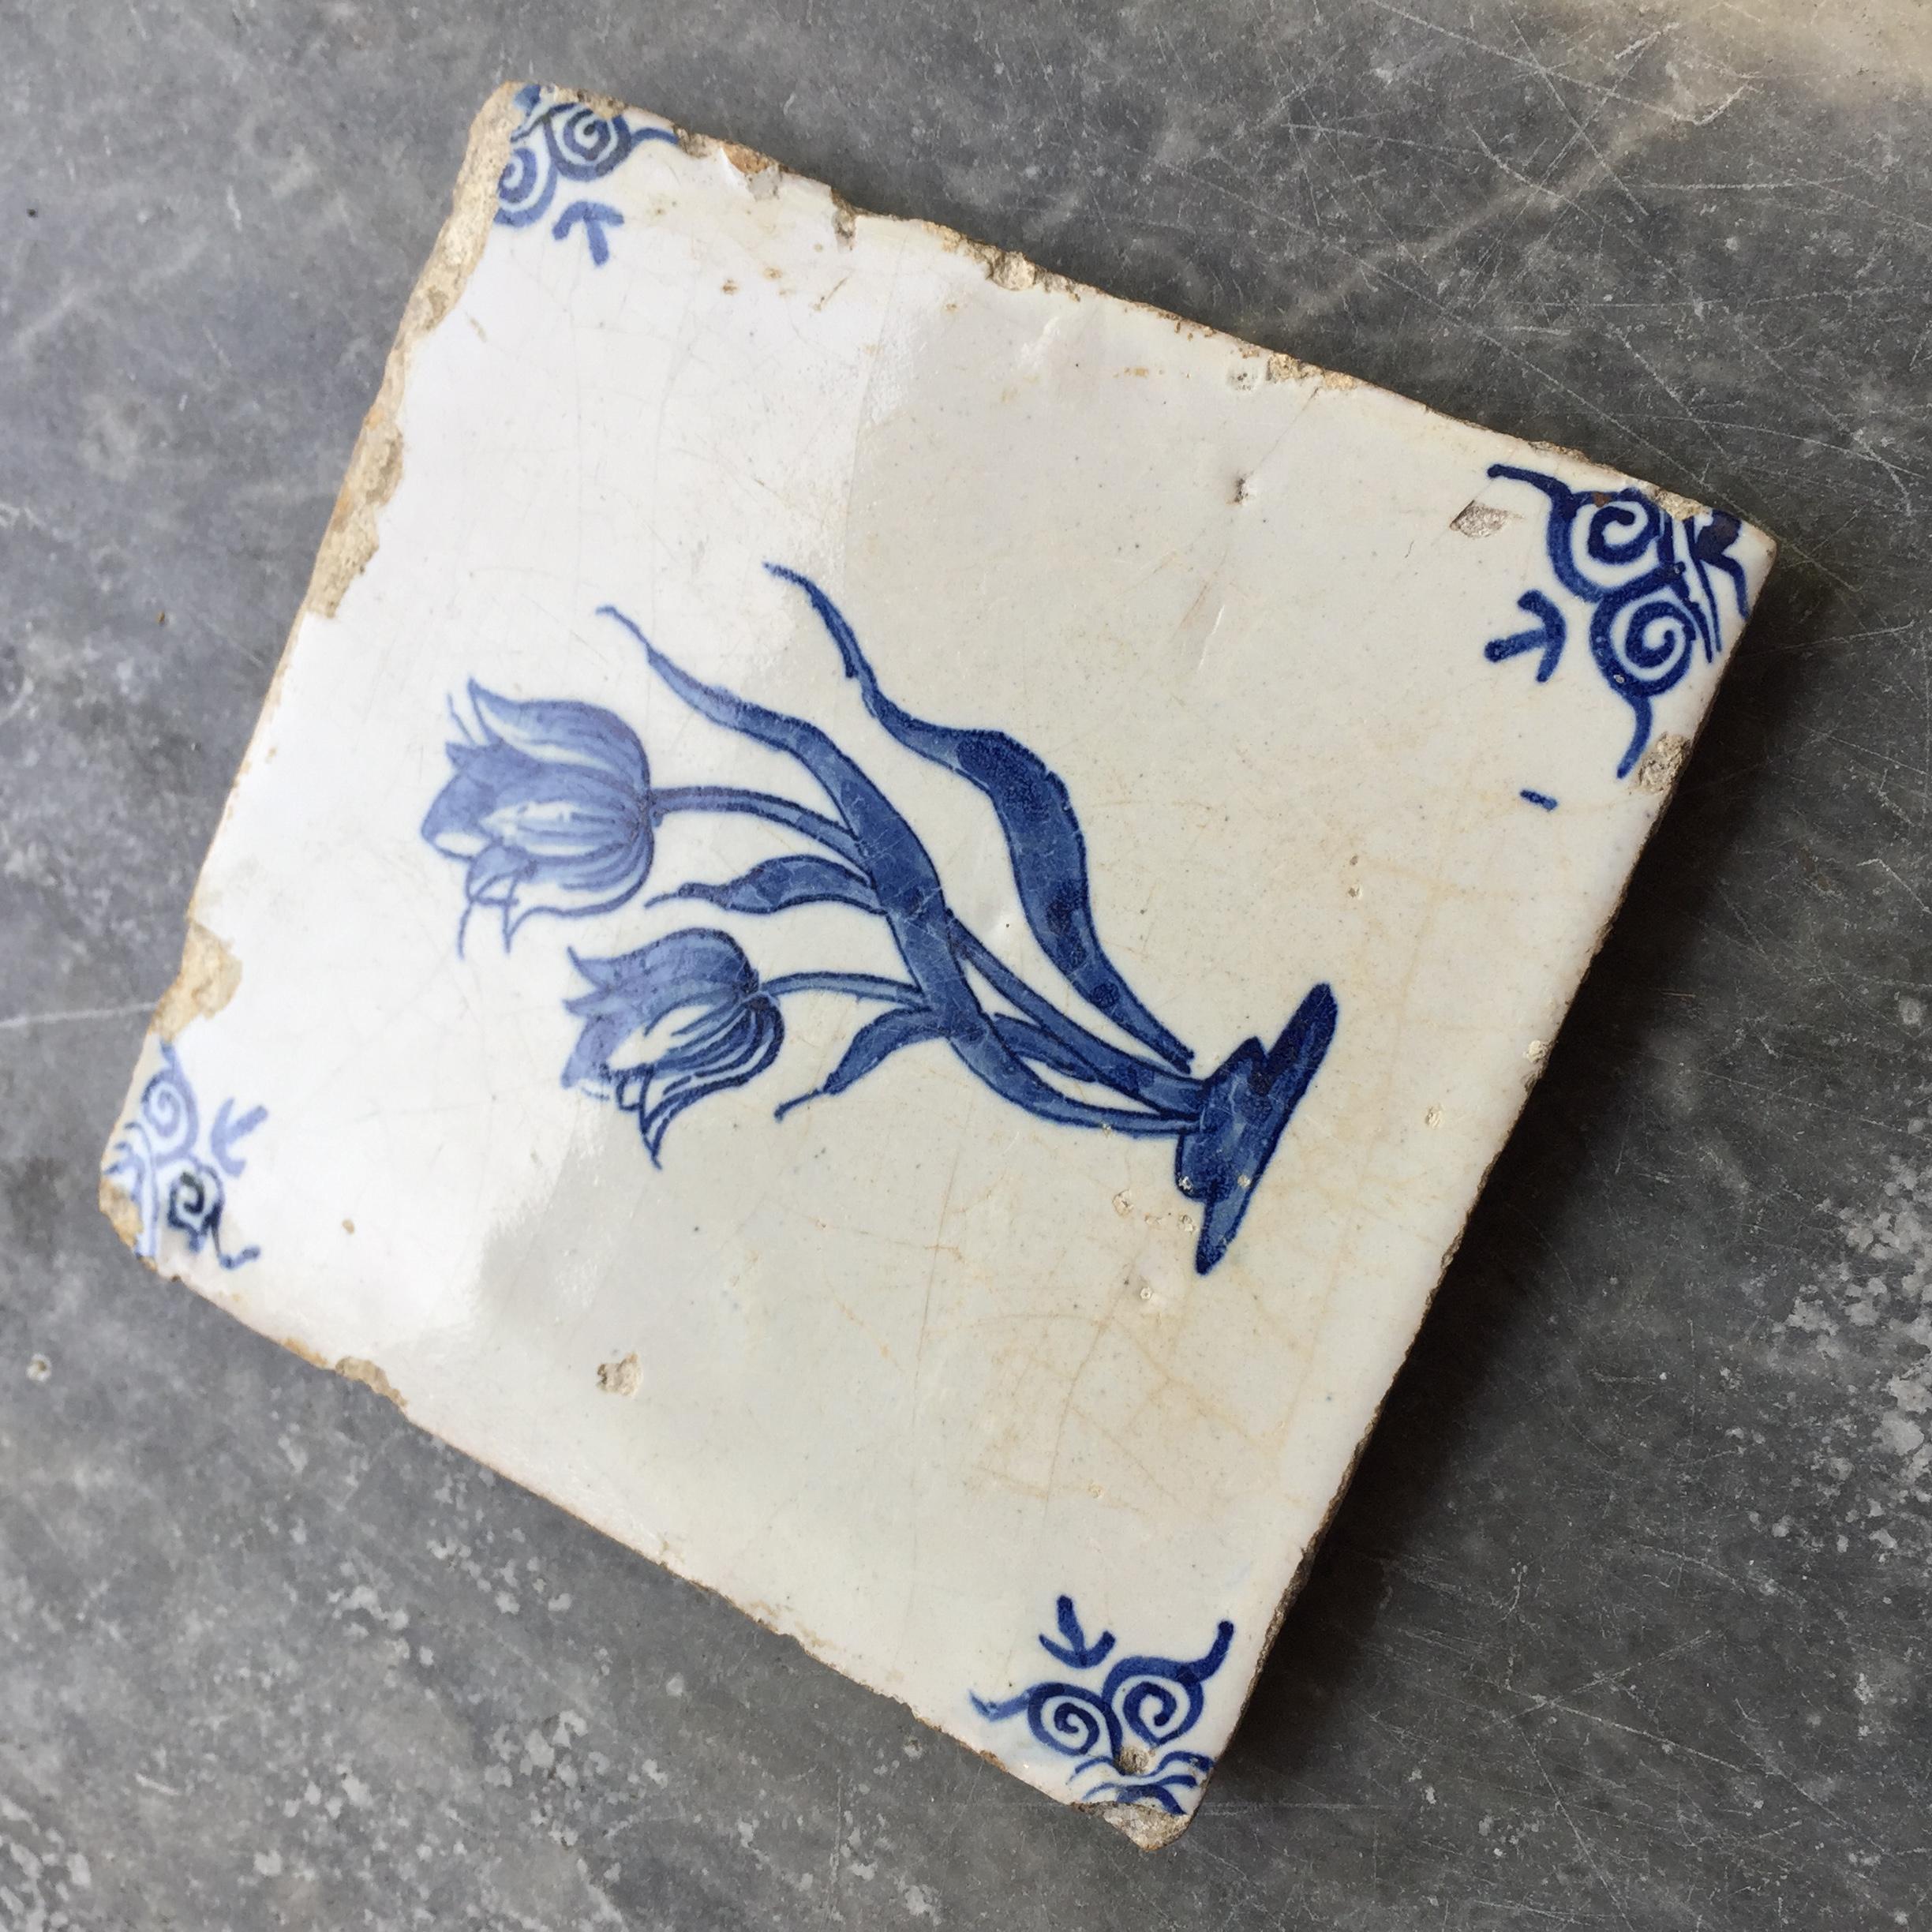 Baroque 17th Century Dutch Delft Tile with Decoration of a Tulips